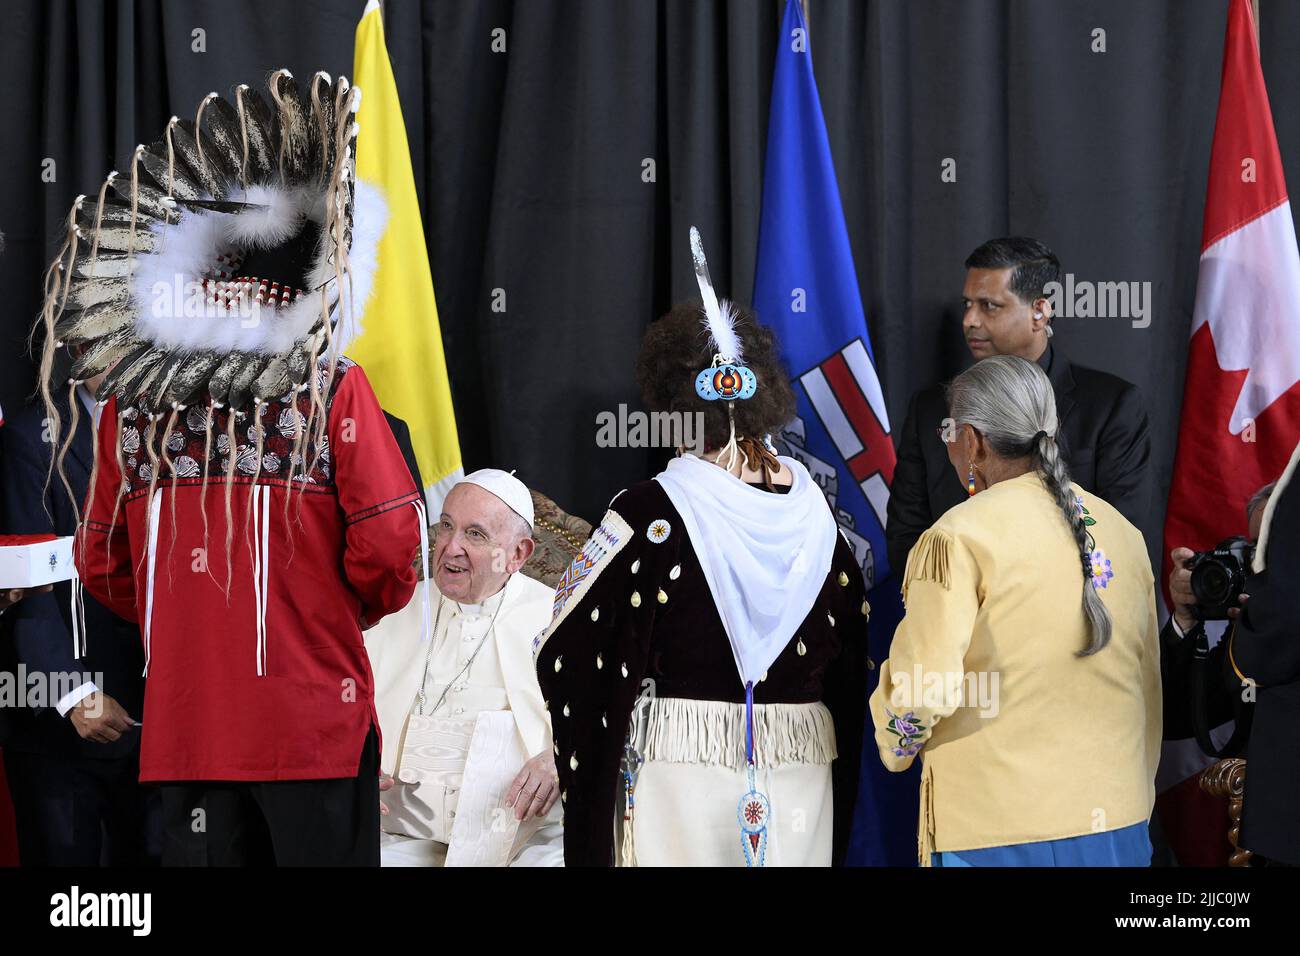 Edmonton, Canada. 24th July, 2022. Pope Francis meets George Arcand (left), Grand Chief of the Confederacy of Treaty Six First Nations, and residential school survivors Elder Vicki Arcand (centre) and Elder Alma Desjarlais (right) during his welcoming ceremony at Edmonton International Airport, AB, western Canada on July 24, 2022 for his six-day papal visit across Canada. Pope's visit to Canada is aimed at reconciliation with Indigenous people for the Catholic Church's role in residential schools. Photo by Vatican Media (EV)/ABACAPRESS.COM Credit: Abaca Press/Alamy Live News Stock Photo